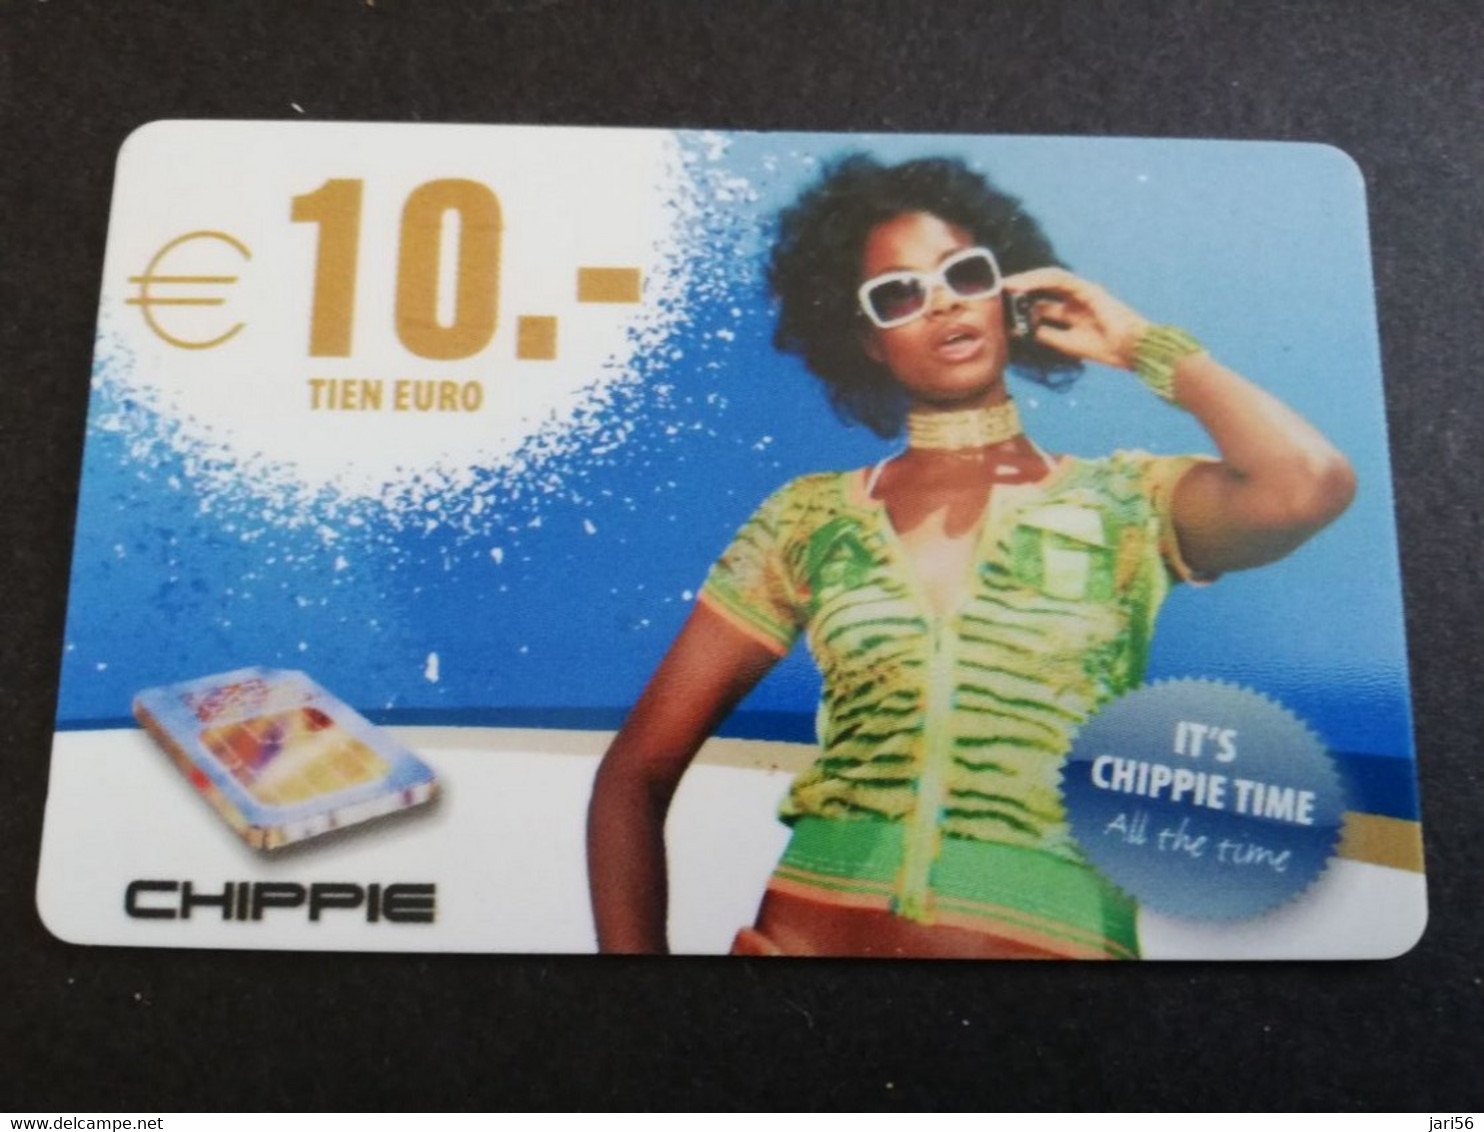 CURACAO  NAF 10- CHIPPIE / ITS CHIPPIE TIME              Fine Used Card   **4910** - Antilles (Neérlandaises)